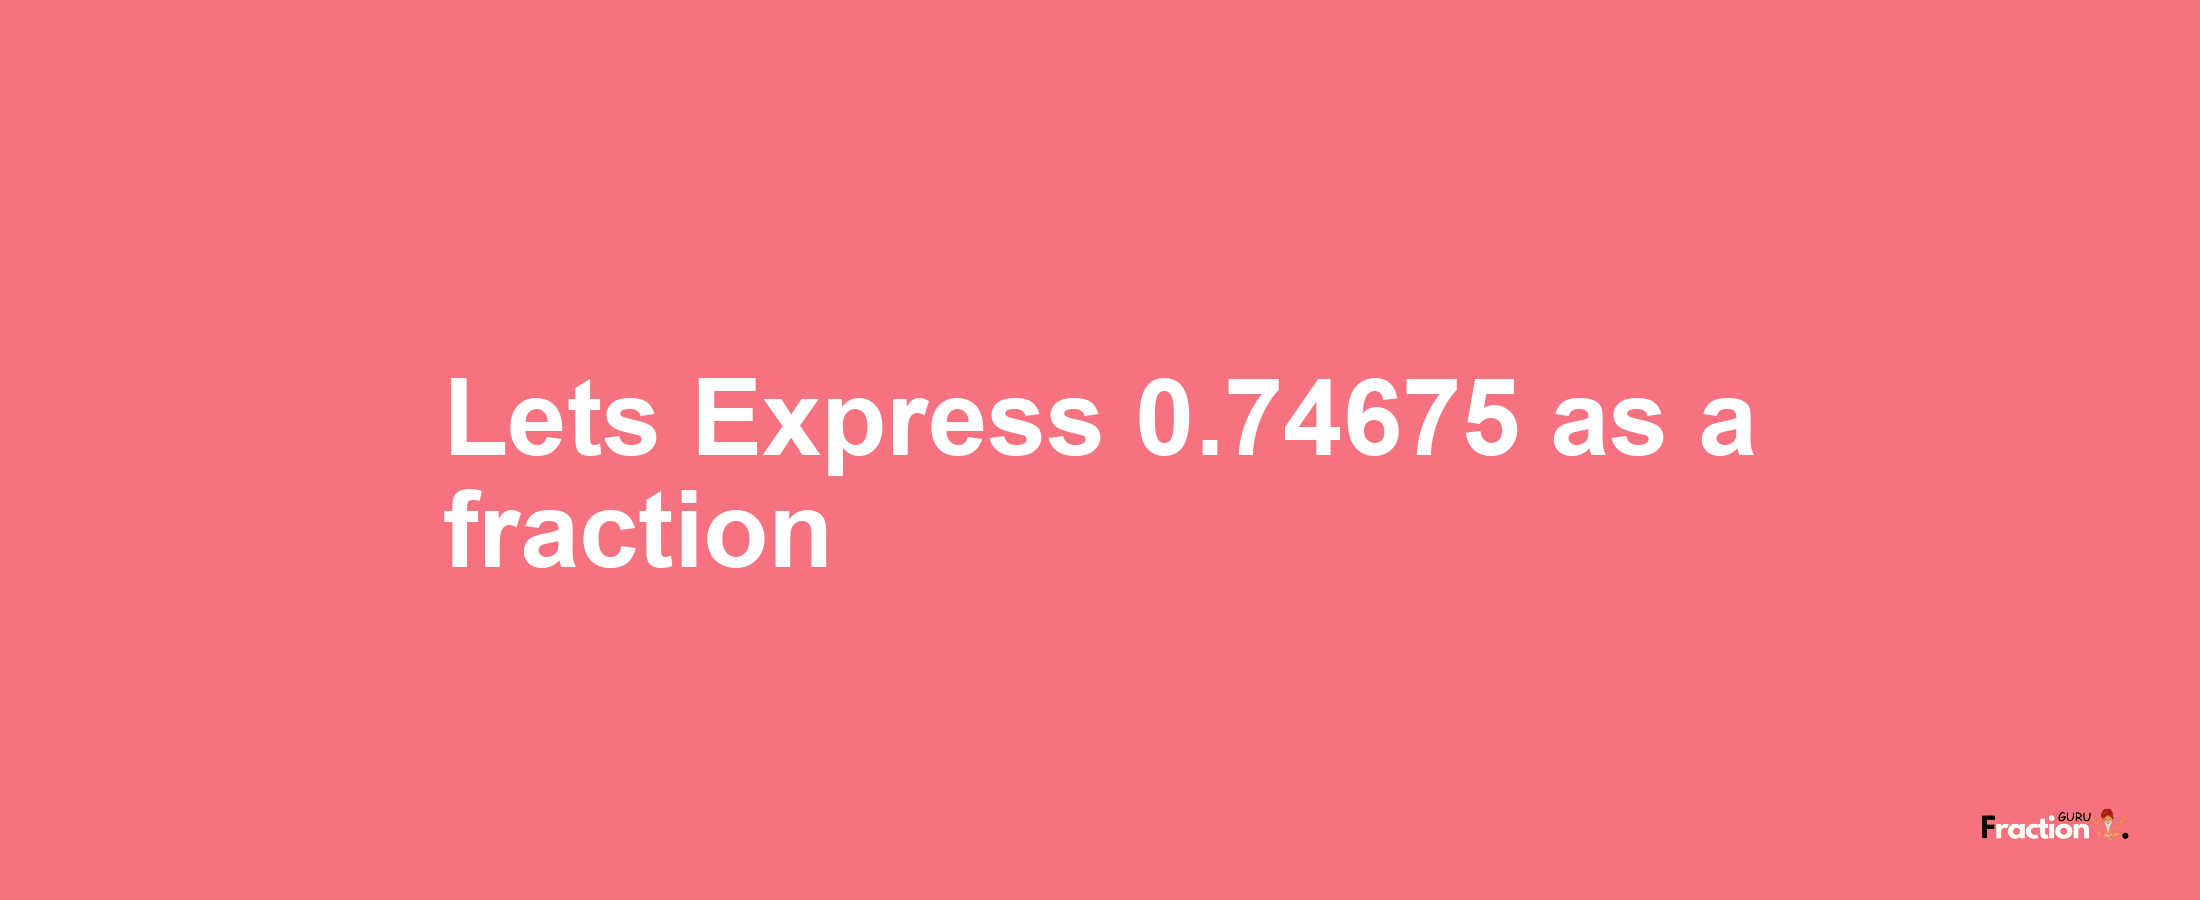 Lets Express 0.74675 as afraction